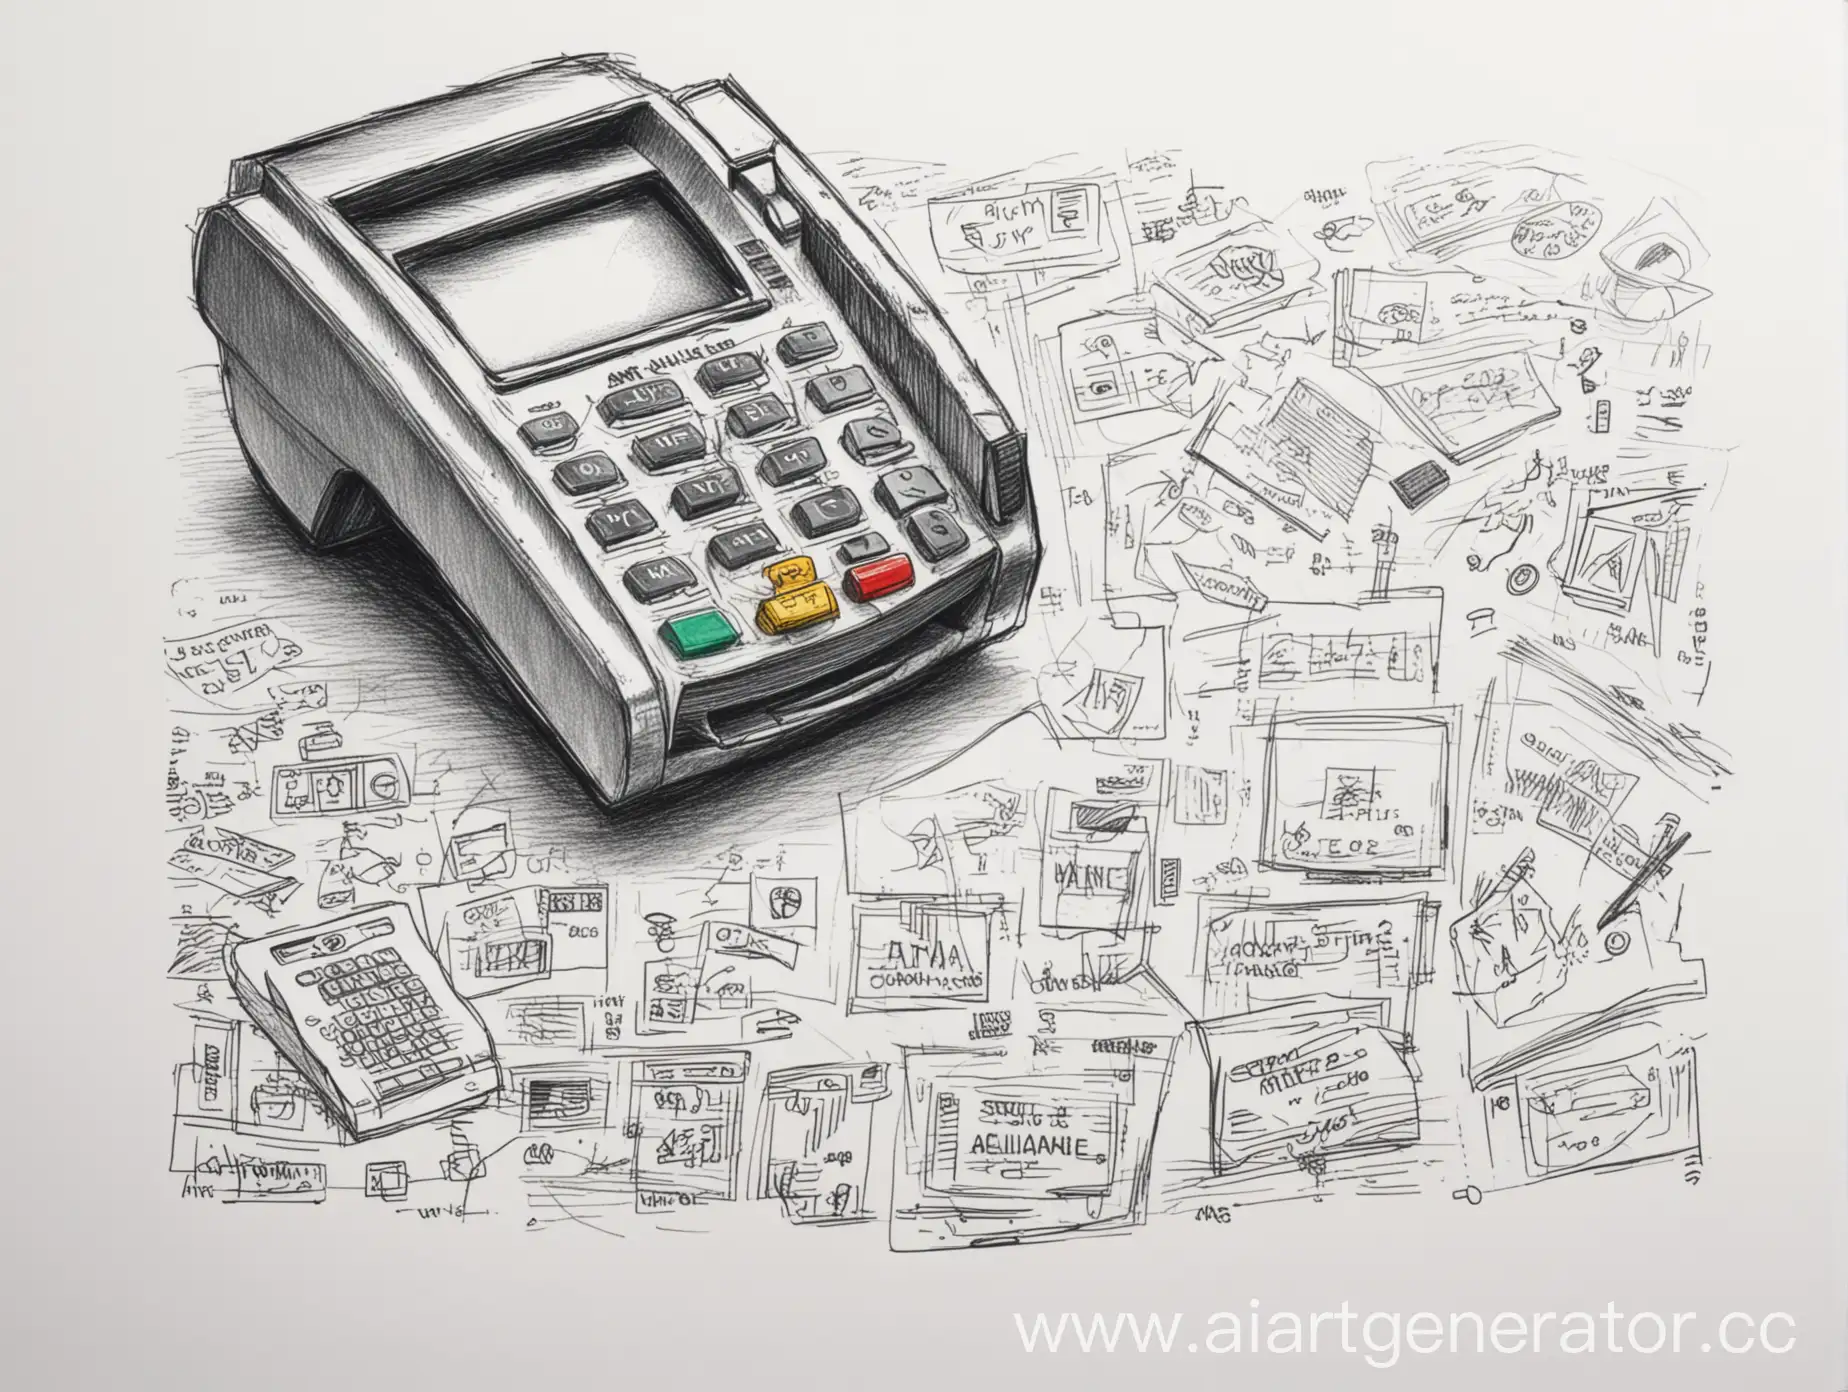 HandDrawn-ATM-Alliance-Logo-with-Payment-Terminal-Sketch